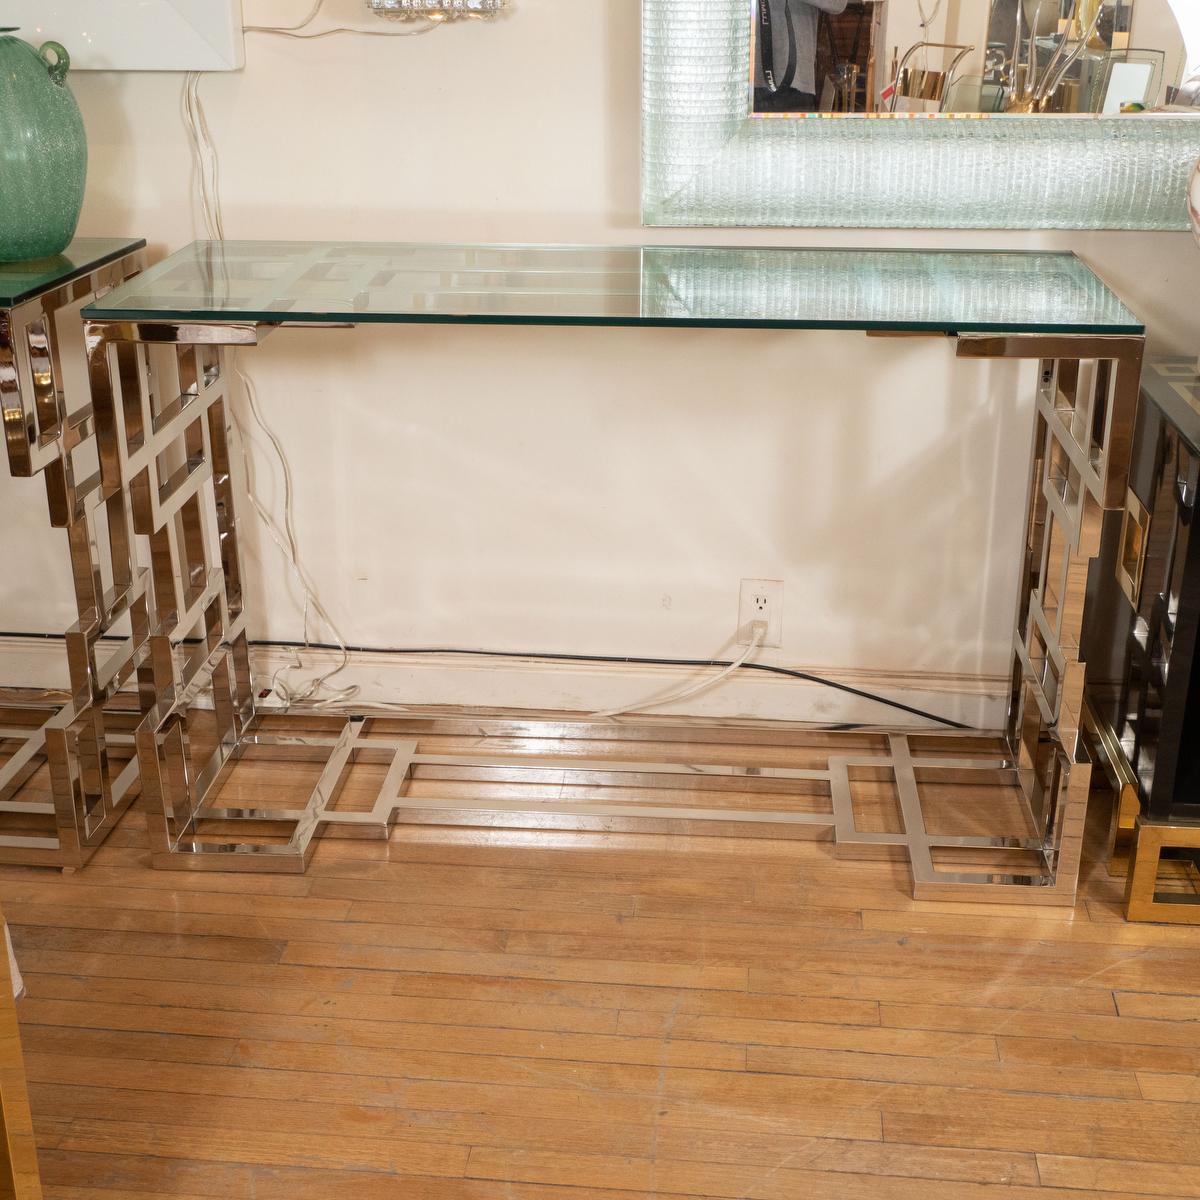 Polished nickel geometric design console table with glass top.